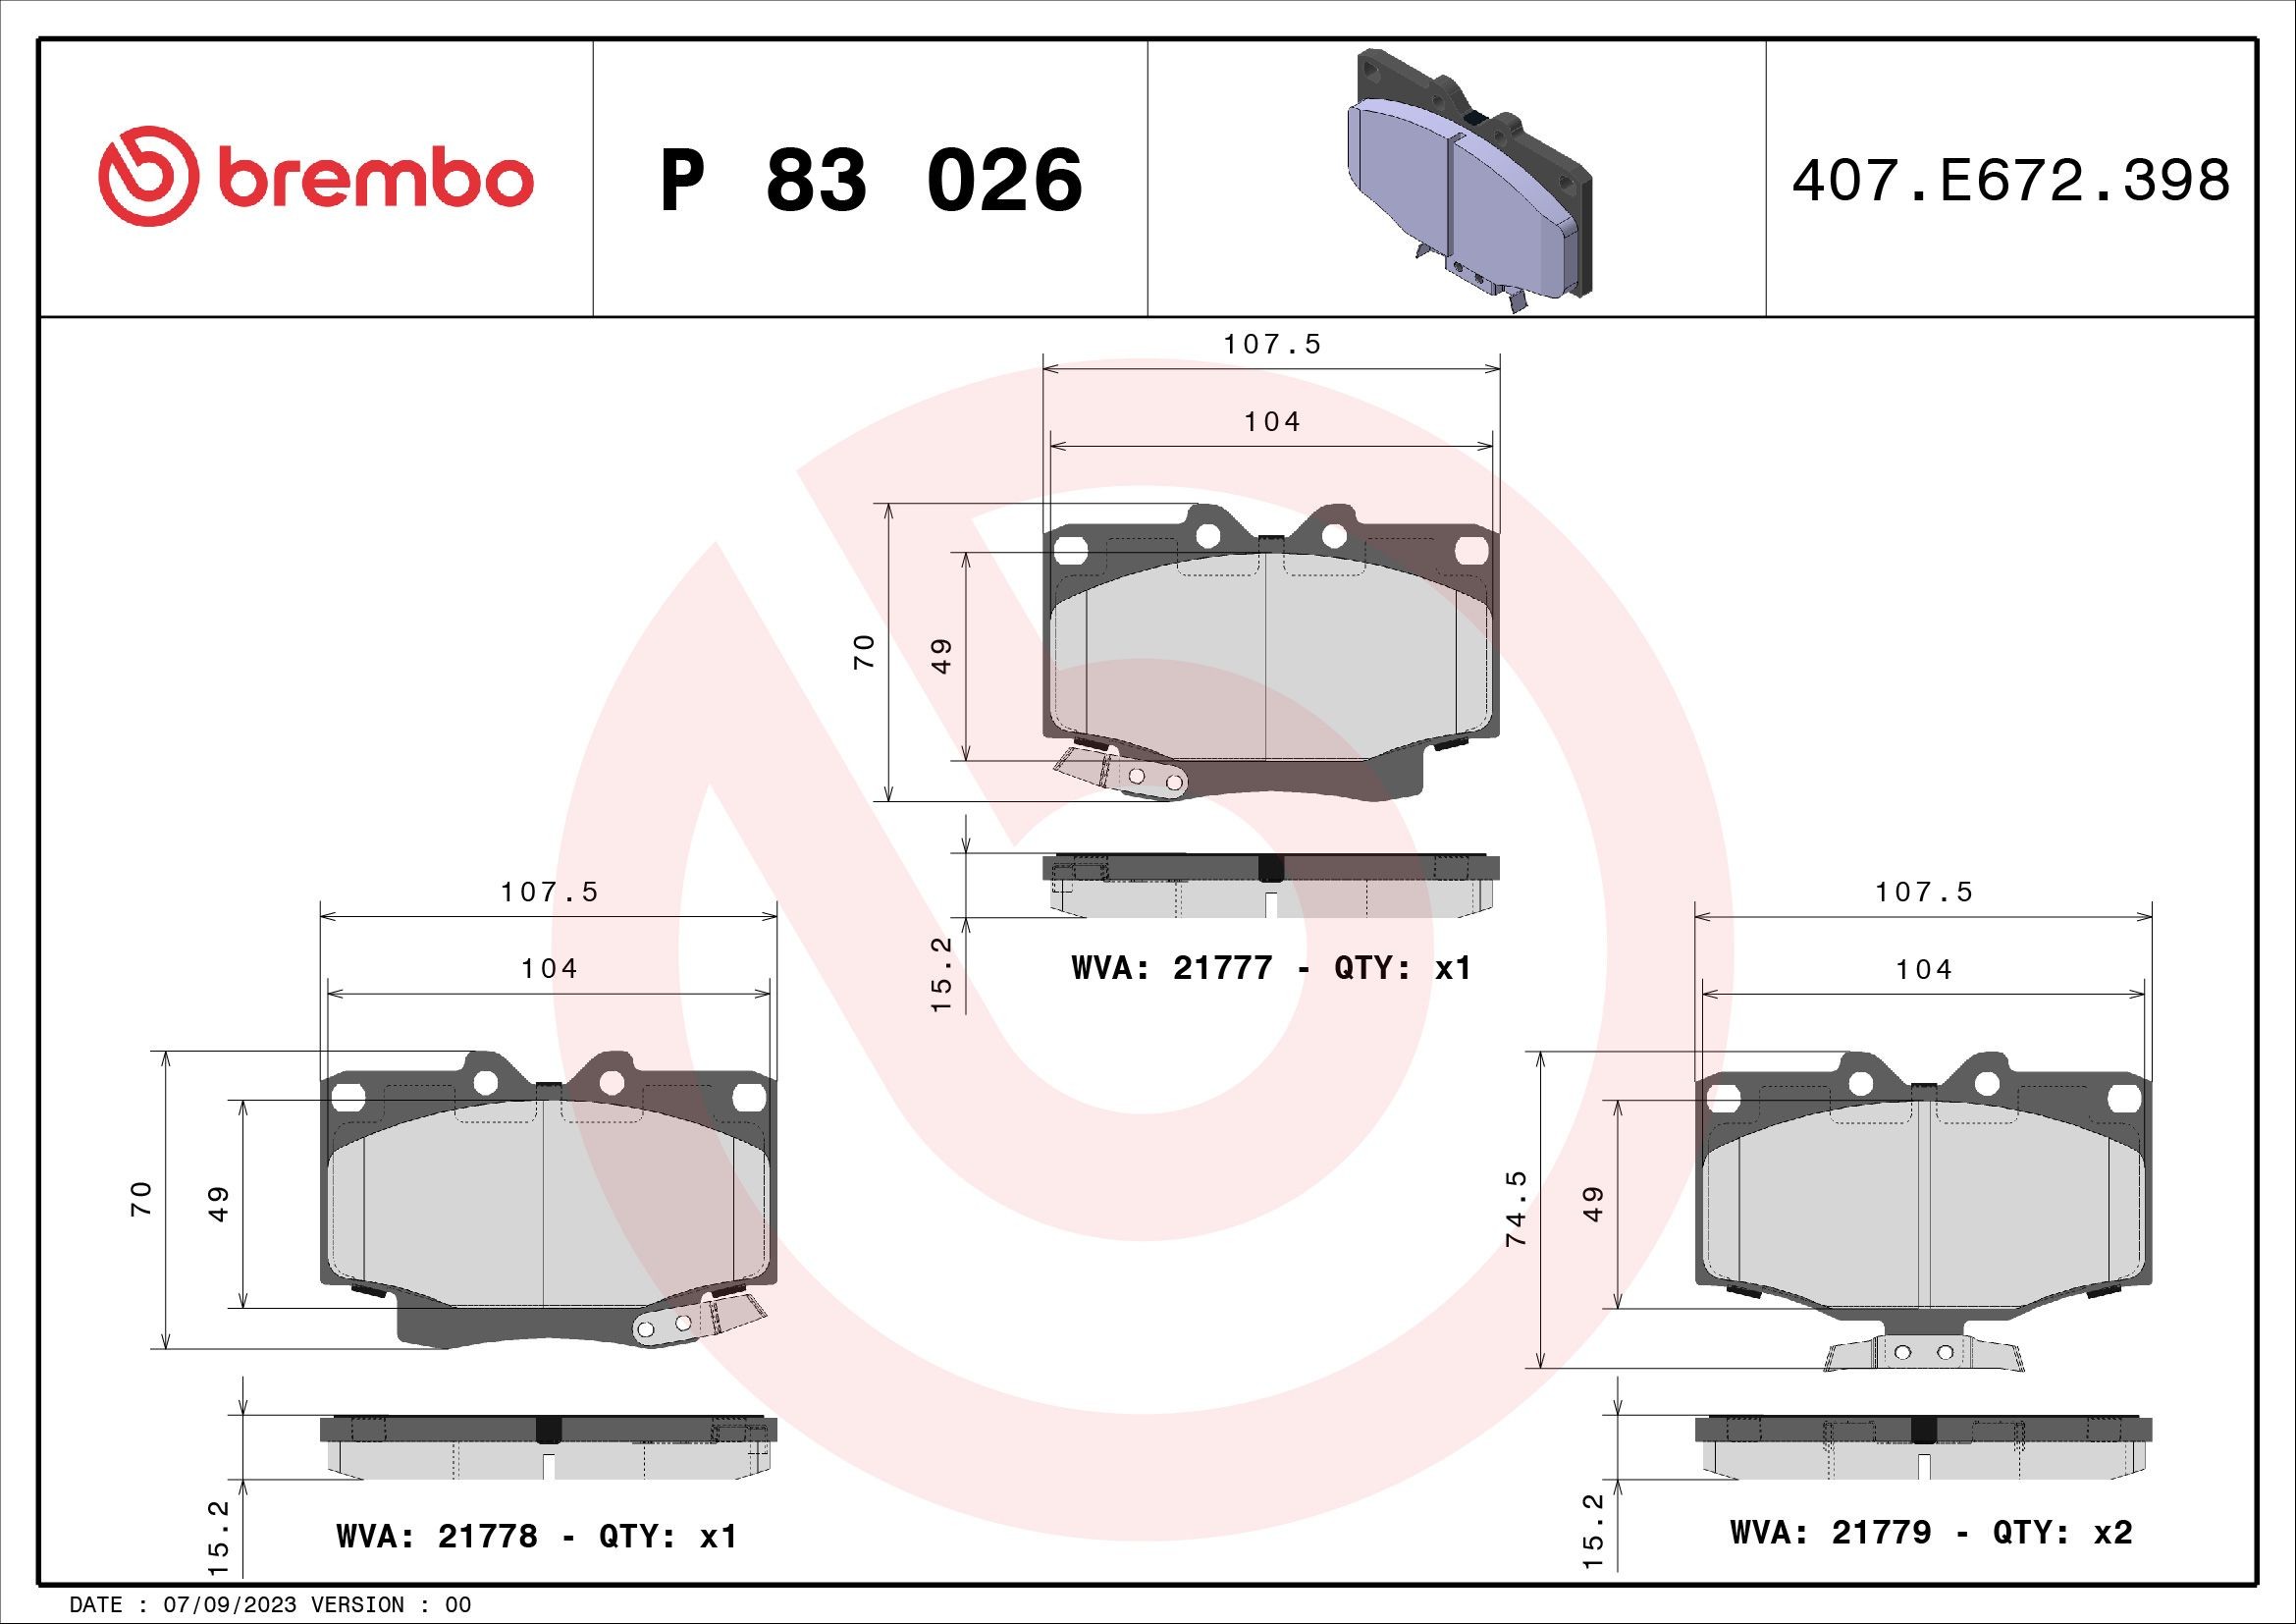 BREMBO P 83 026 Brake pad set with acoustic wear warning, without accessories